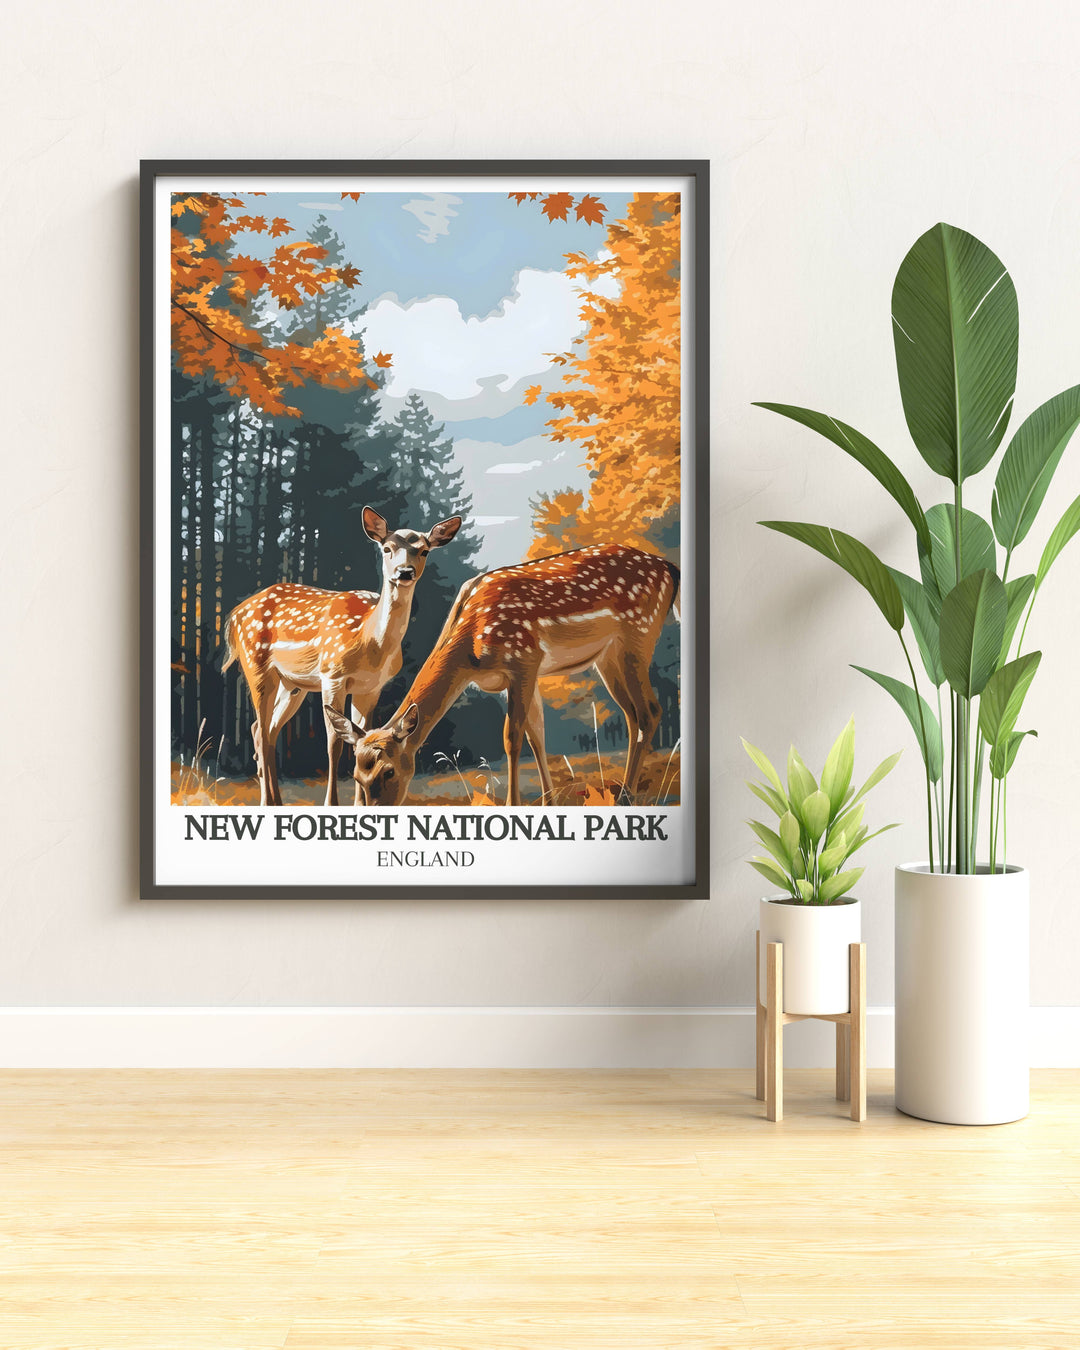 Vintage travel poster of New Forest National Park, ideal for adding a touch of English countryside to any room.